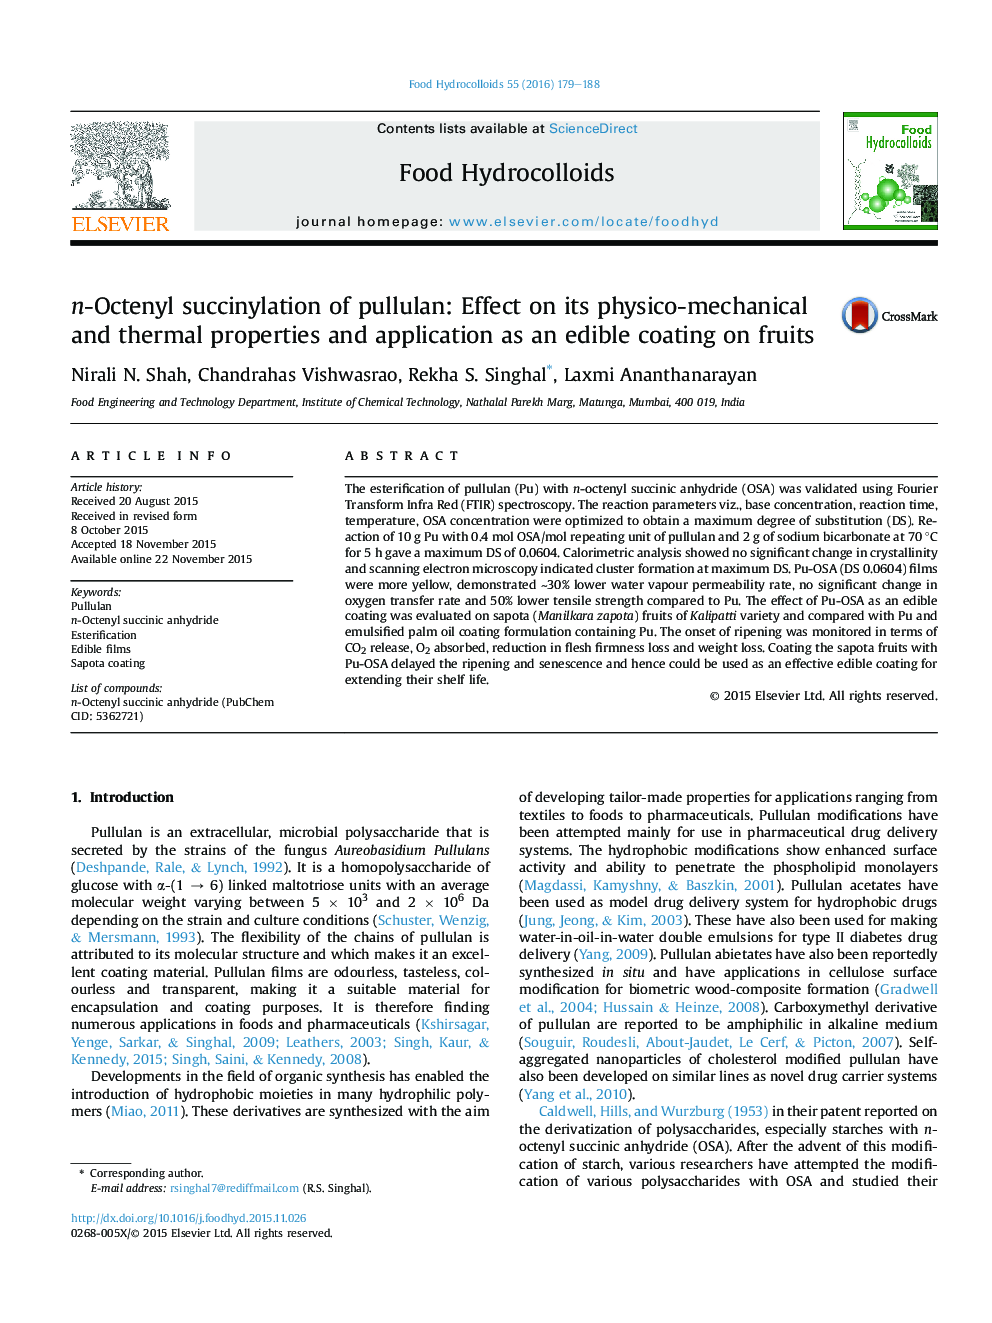 n-Octenyl succinylation of pullulan: Effect on its physico-mechanical and thermal properties and application as an edible coating on fruits